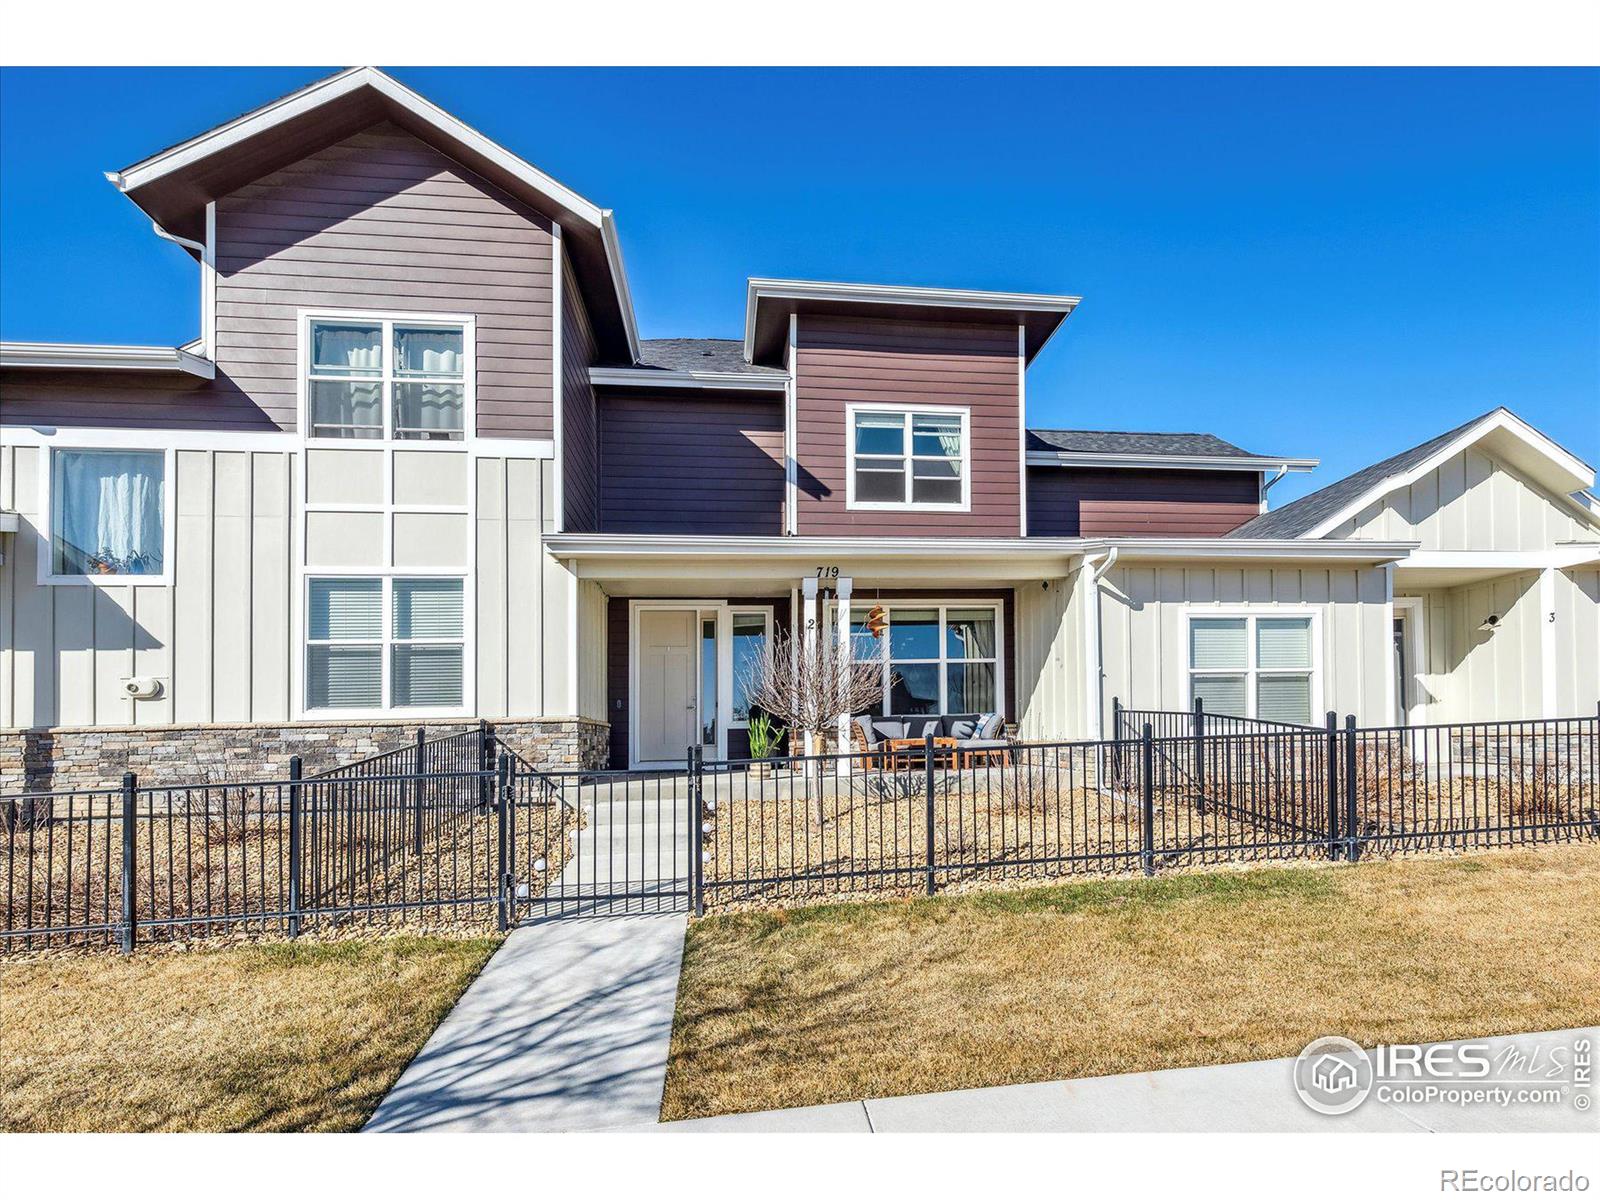 719  Greenfields Drive, fort collins MLS: 4567891004053 Beds: 3 Baths: 3 Price: $425,000